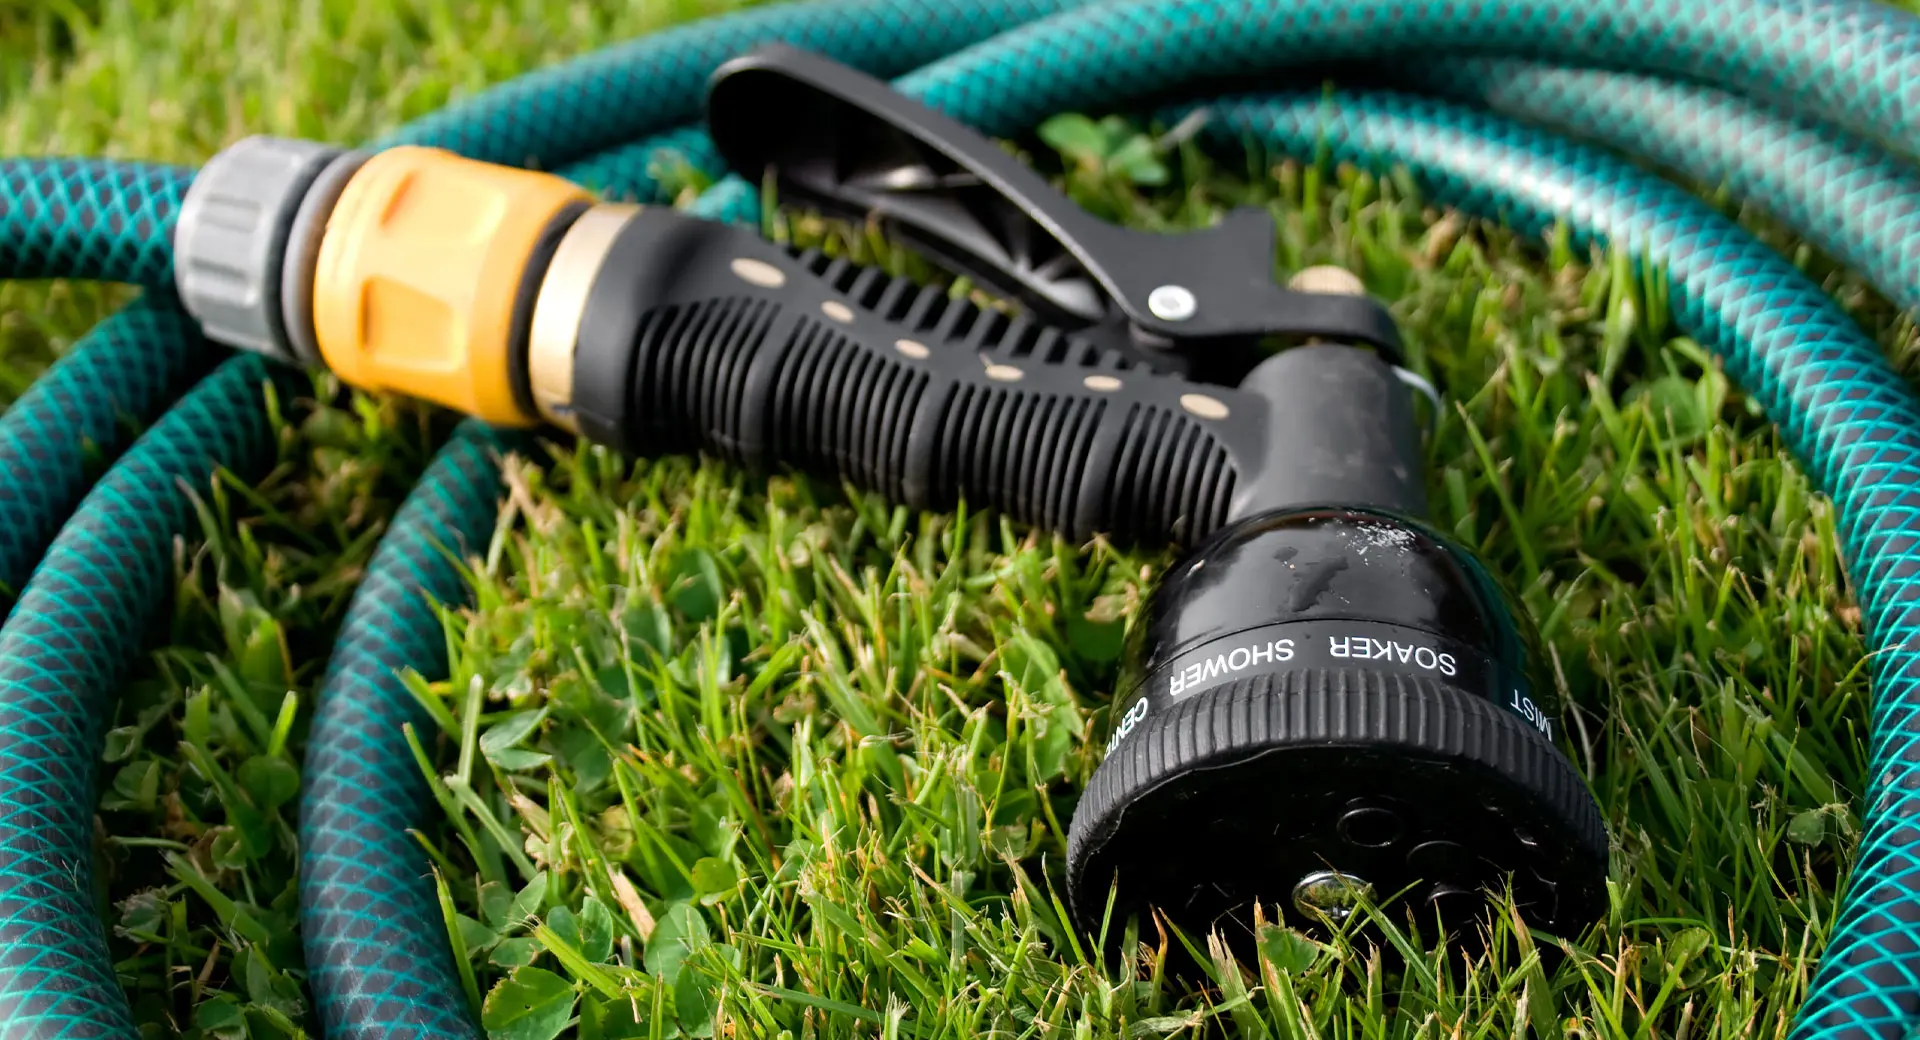 A close-up of a hosepipe lying on grass